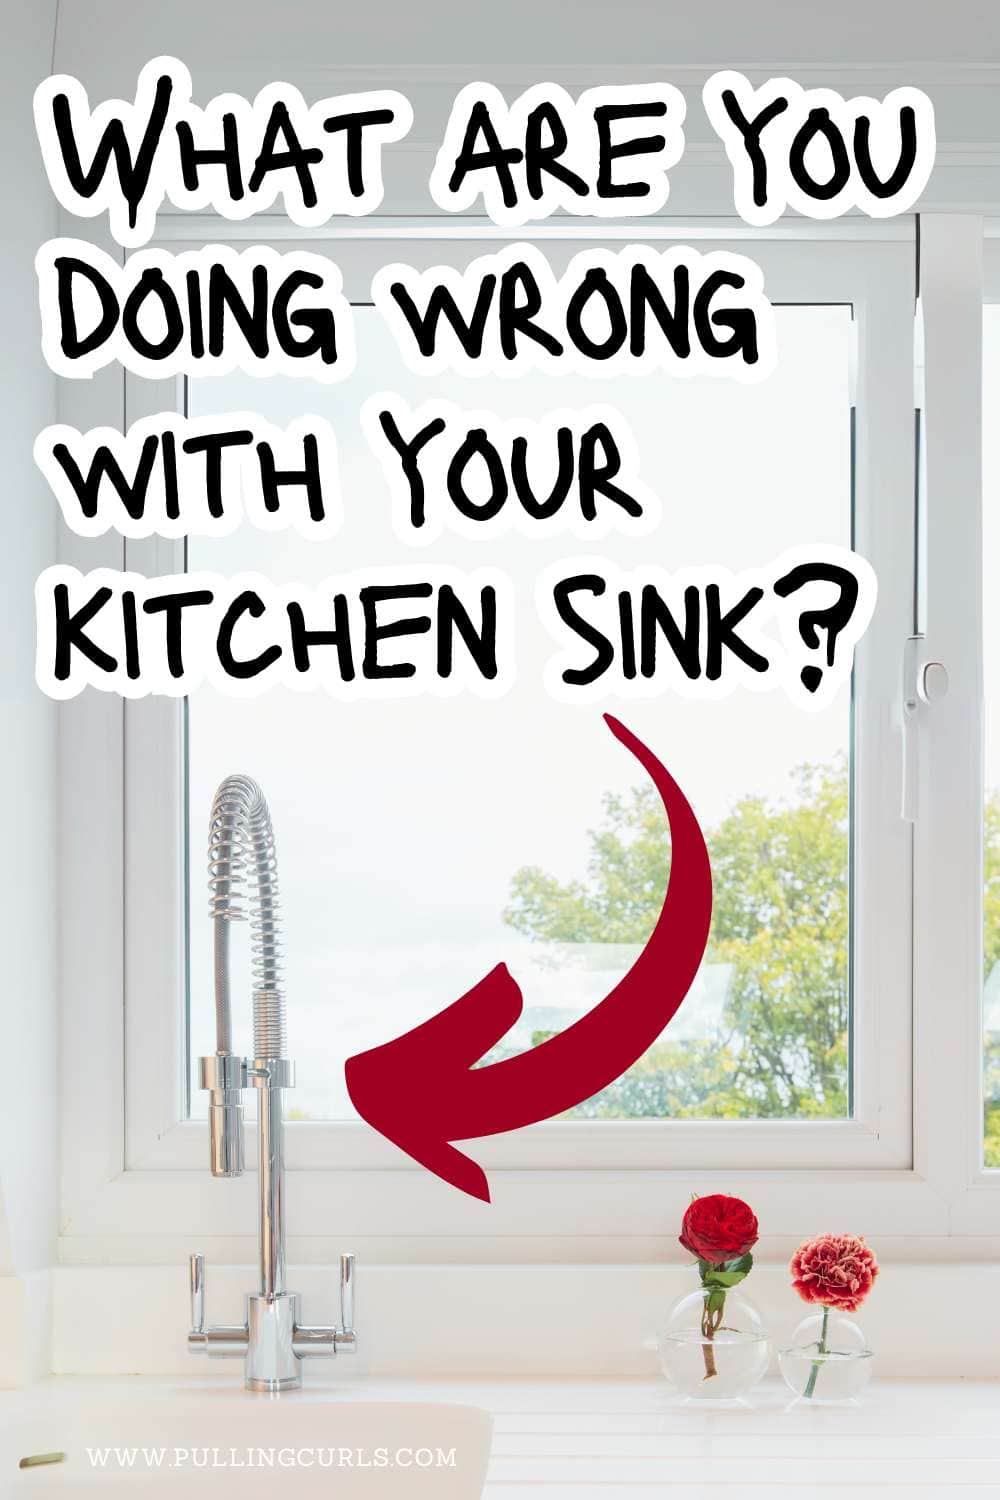 Looking to spruce up your kitchen? Check out our fabulous collection of kitchen sink hacks 🥄! From creative organizational tips to fun DIY projects, we've got you covered! Say goodbye to clutter and hello to a beautifully organized sink area💚! via @pullingcurls